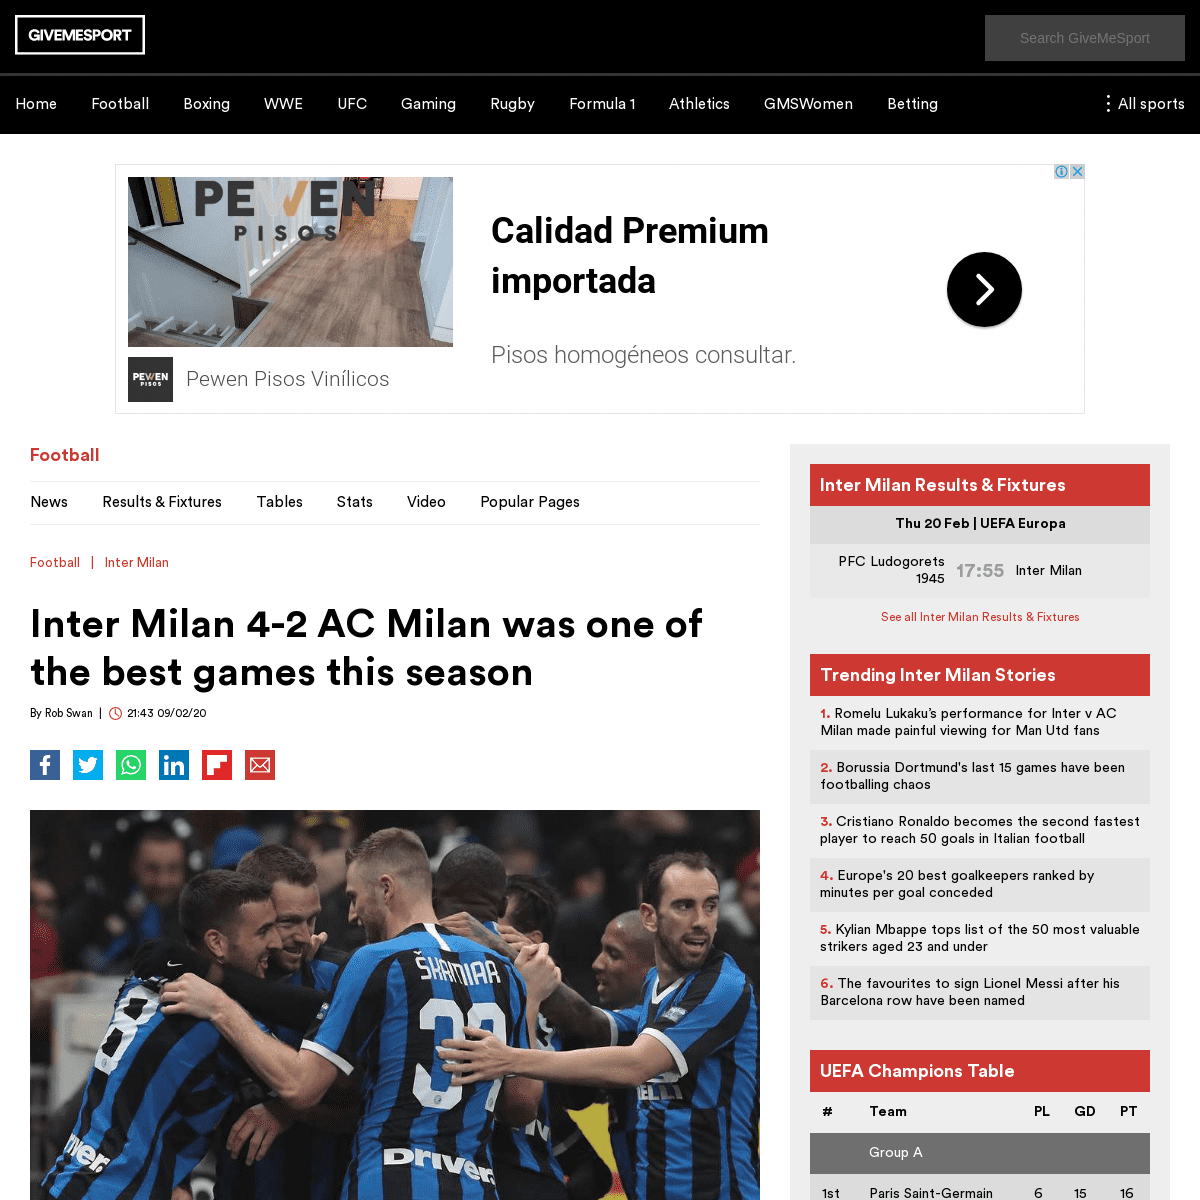 A complete backup of www.givemesport.com/1545503-inter-milan-42-ac-milan-was-one-of-the-best-games-this-season